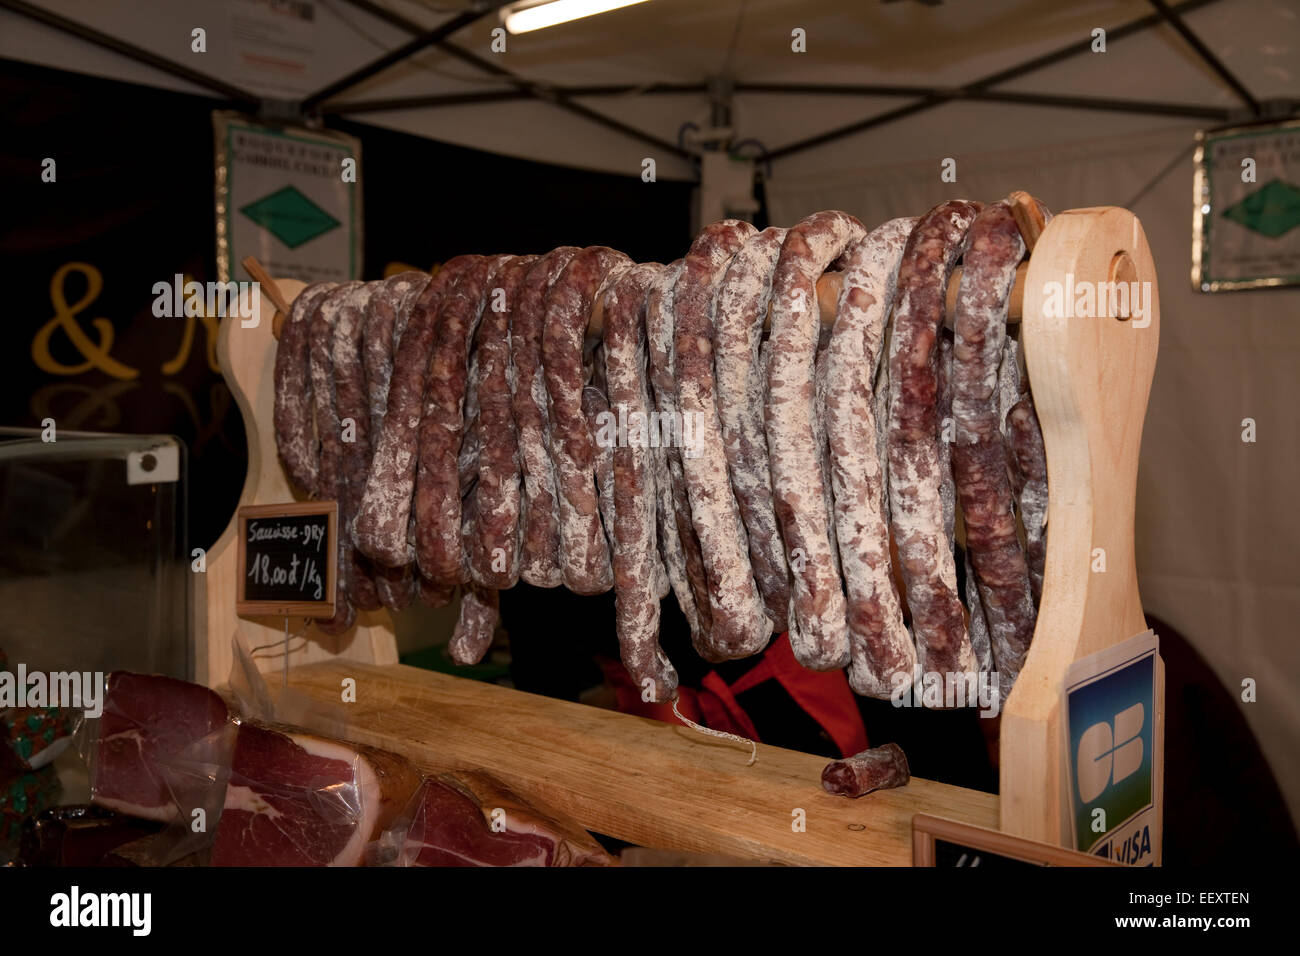 A selection of saucisson at the France Show which opened today at Olympia in London Stock Photo